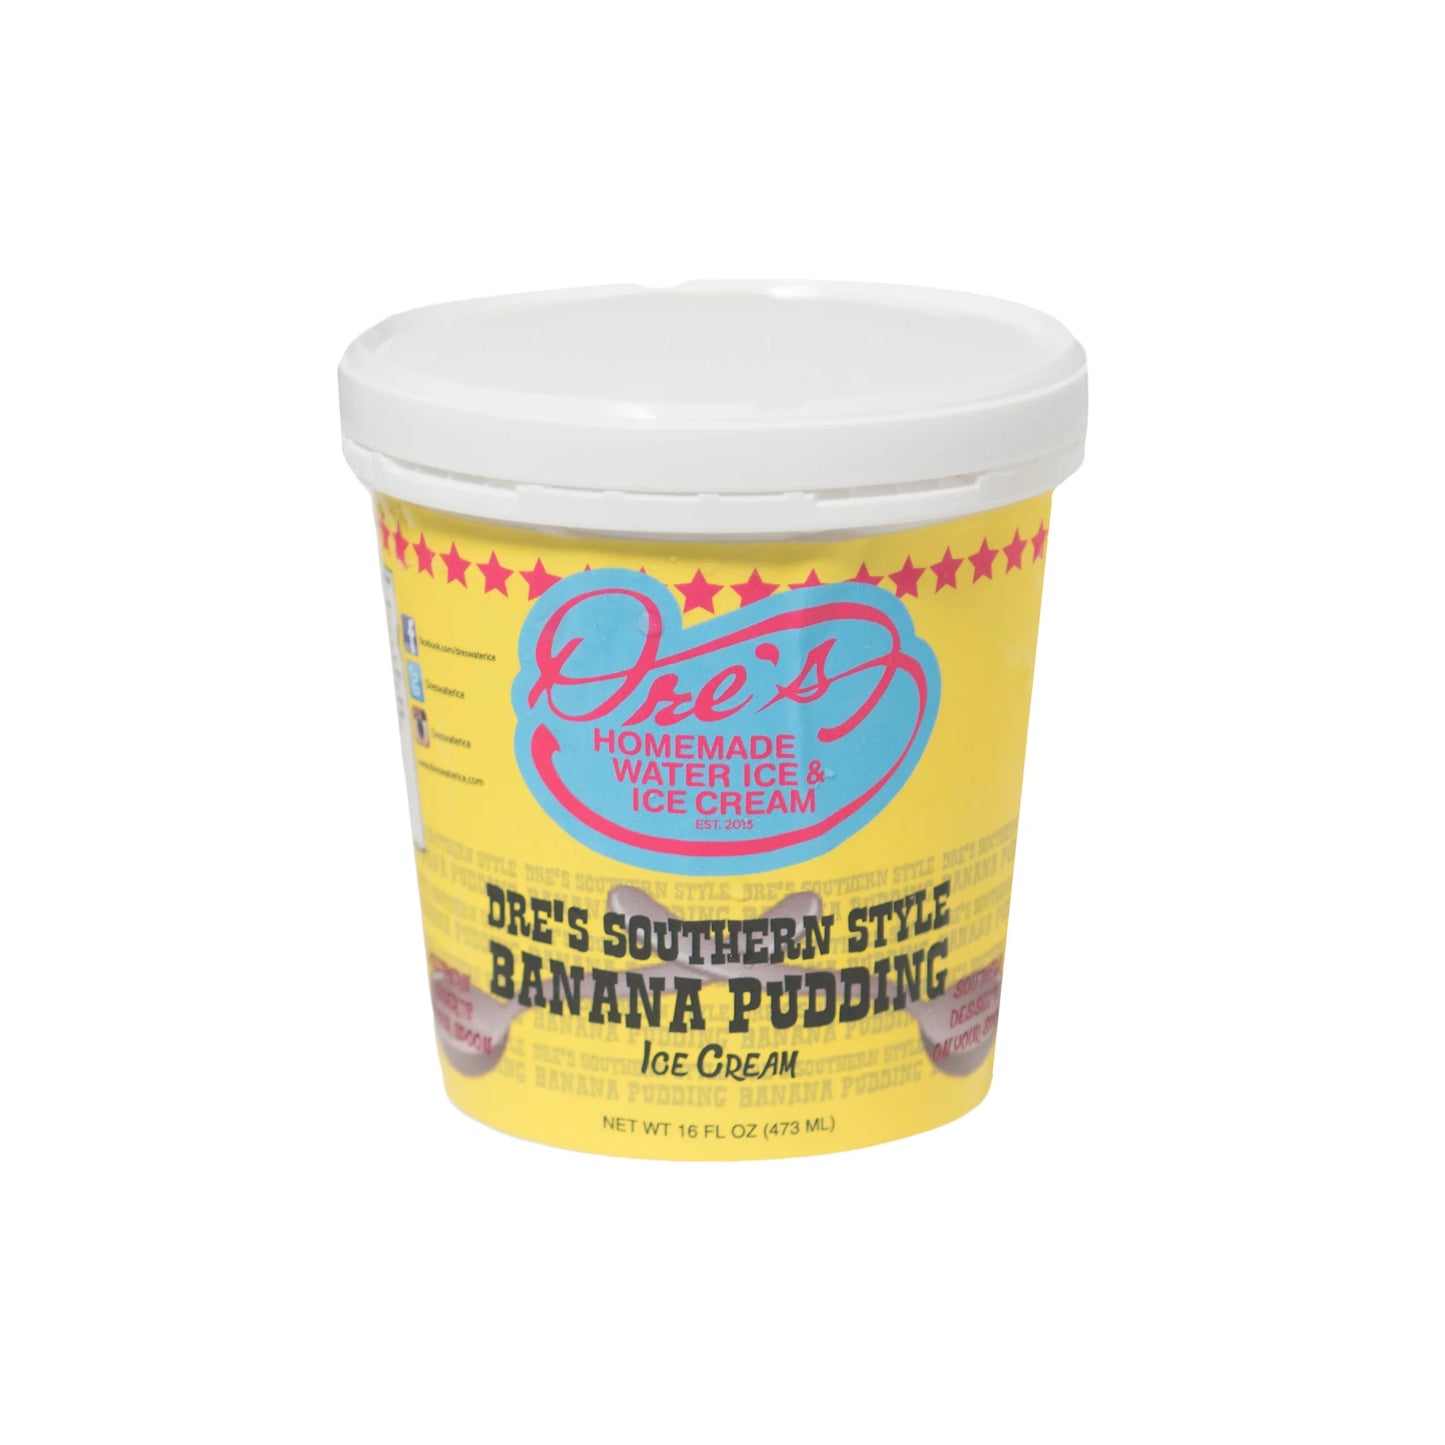 Dre's Southern Style Banana Pudding Ice Cream